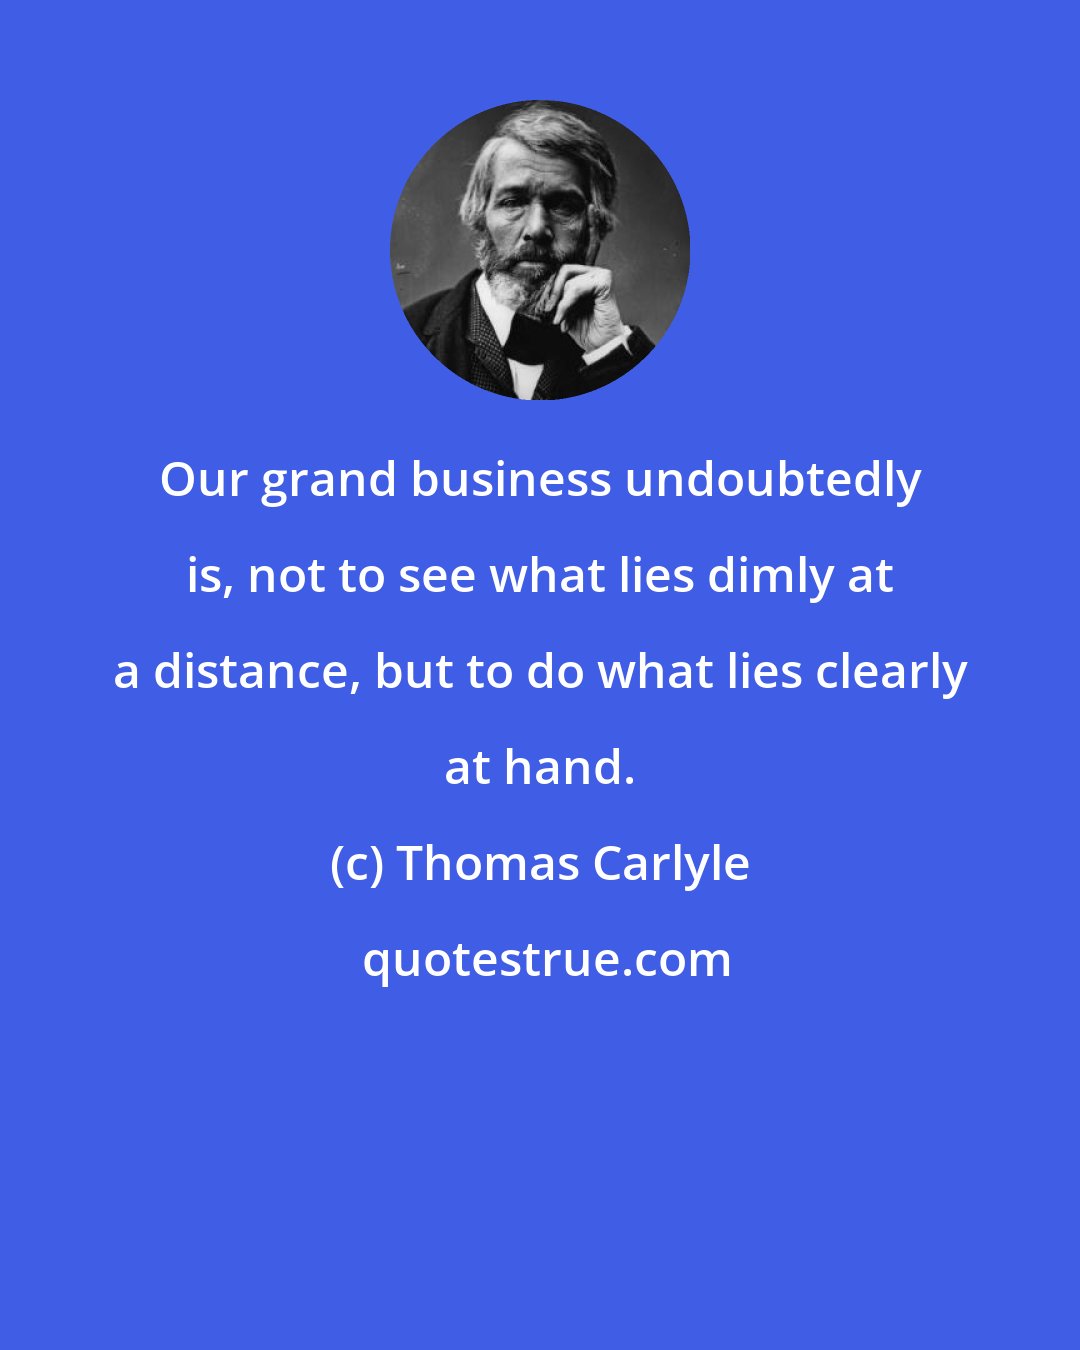 Thomas Carlyle: Our grand business undoubtedly is, not to see what lies dimly at a distance, but to do what lies clearly at hand.